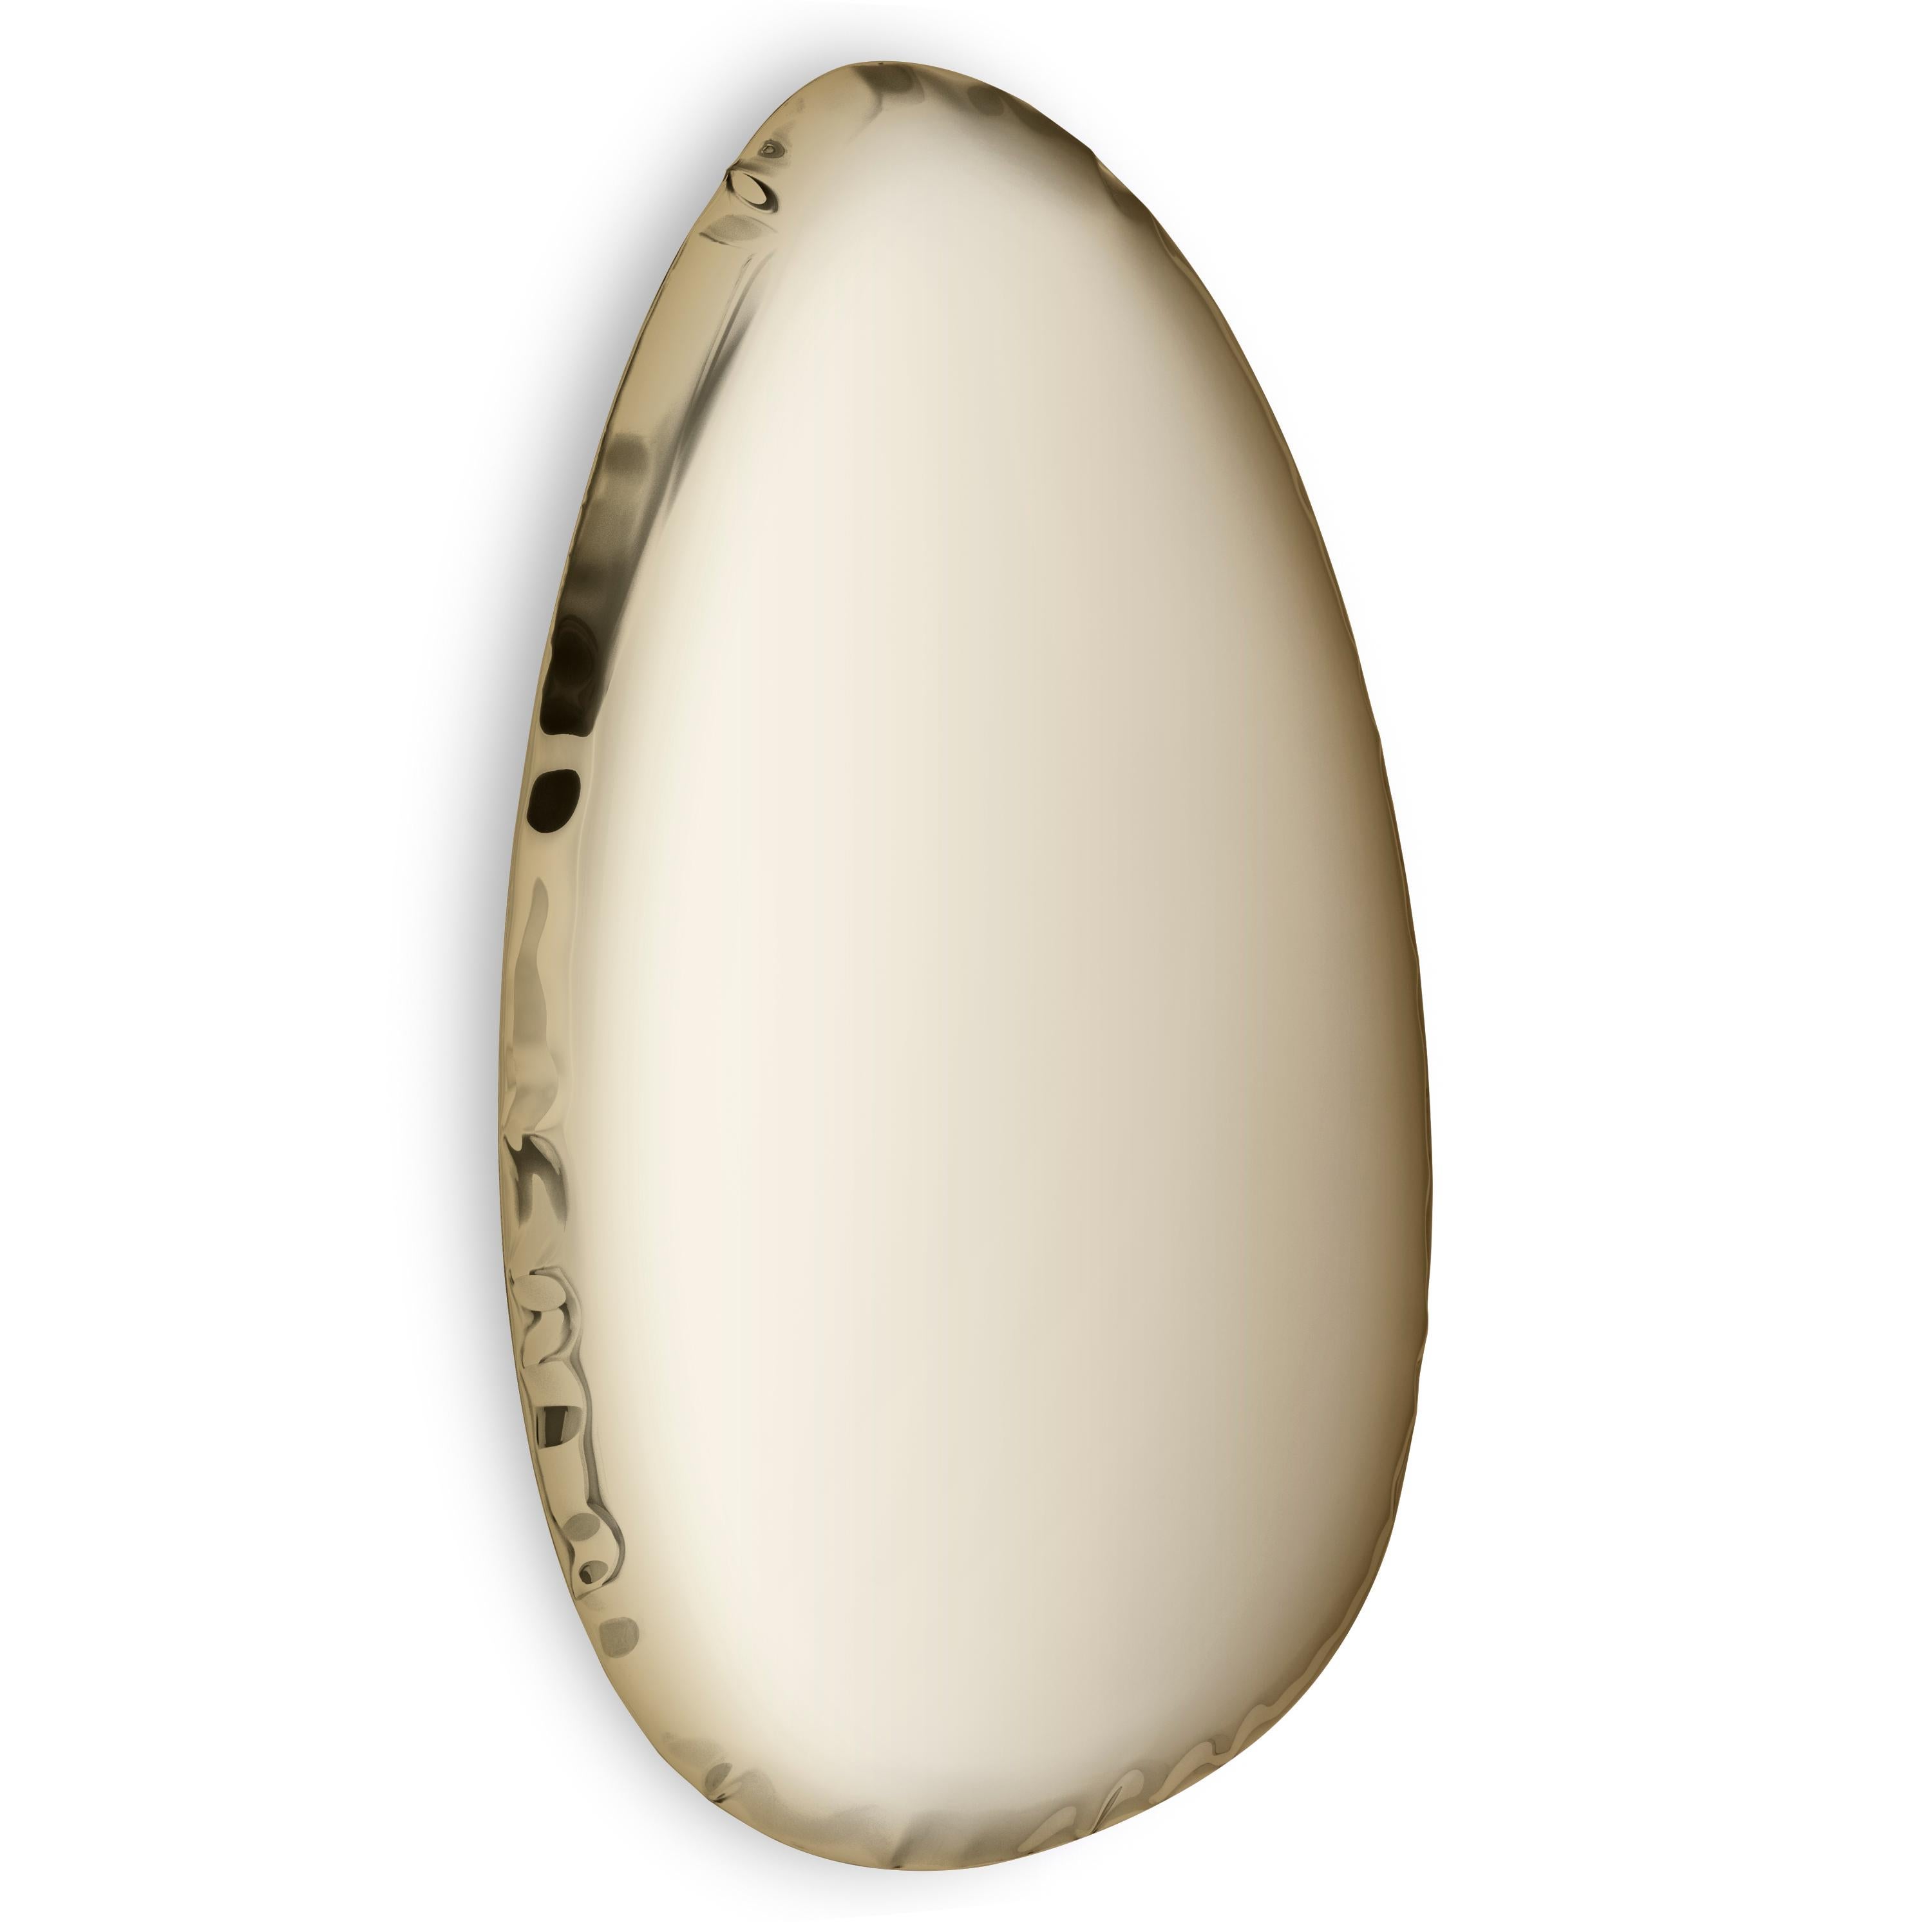 Contemporary Mirror 'Tafla O4.5', AURUM Collection, Rose Gold, by Zieta For Sale 1